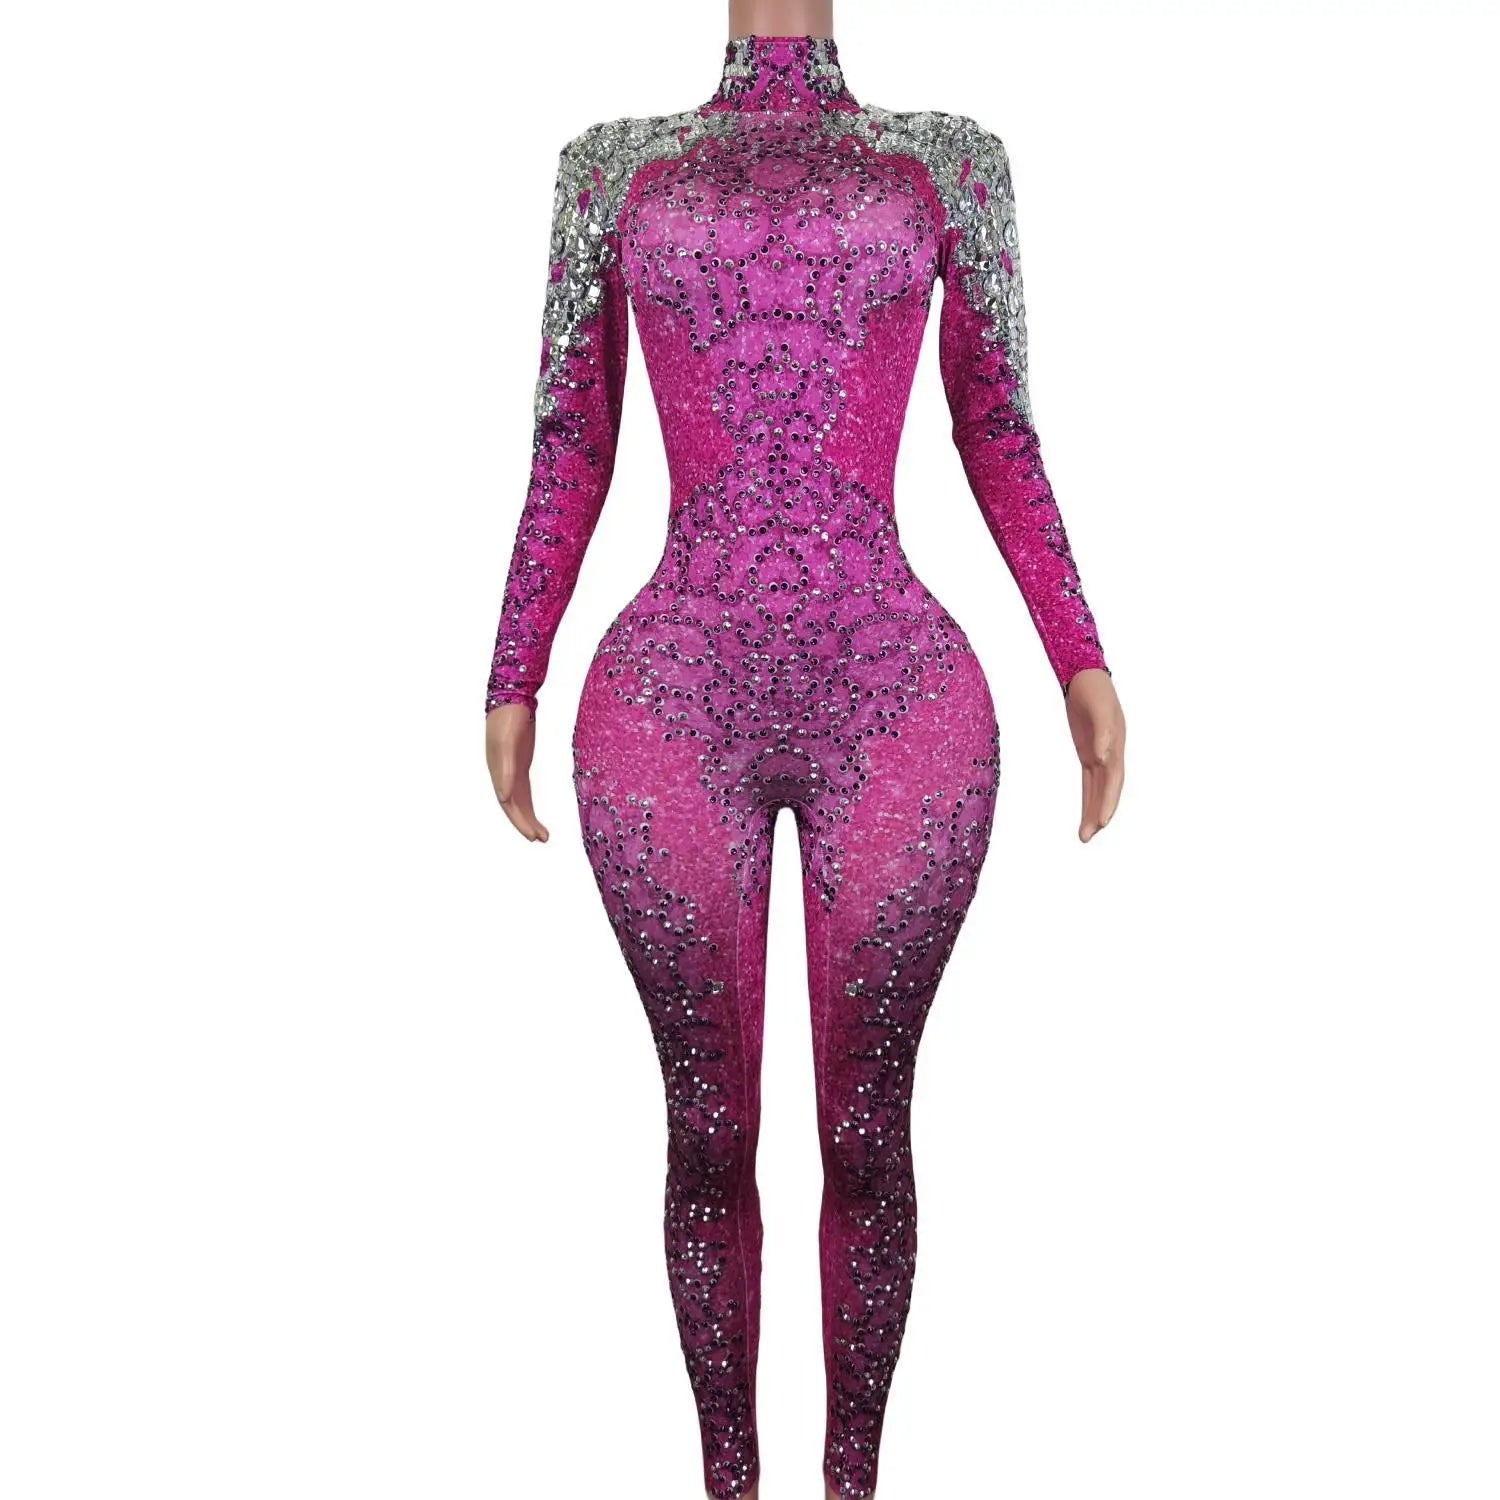 Sparkly Silver Crystals Long Sleeves Jumpsuit Pink Birthday Celebrate Costume Girl Dance Prom Party Photo Shoot Jumpsuit